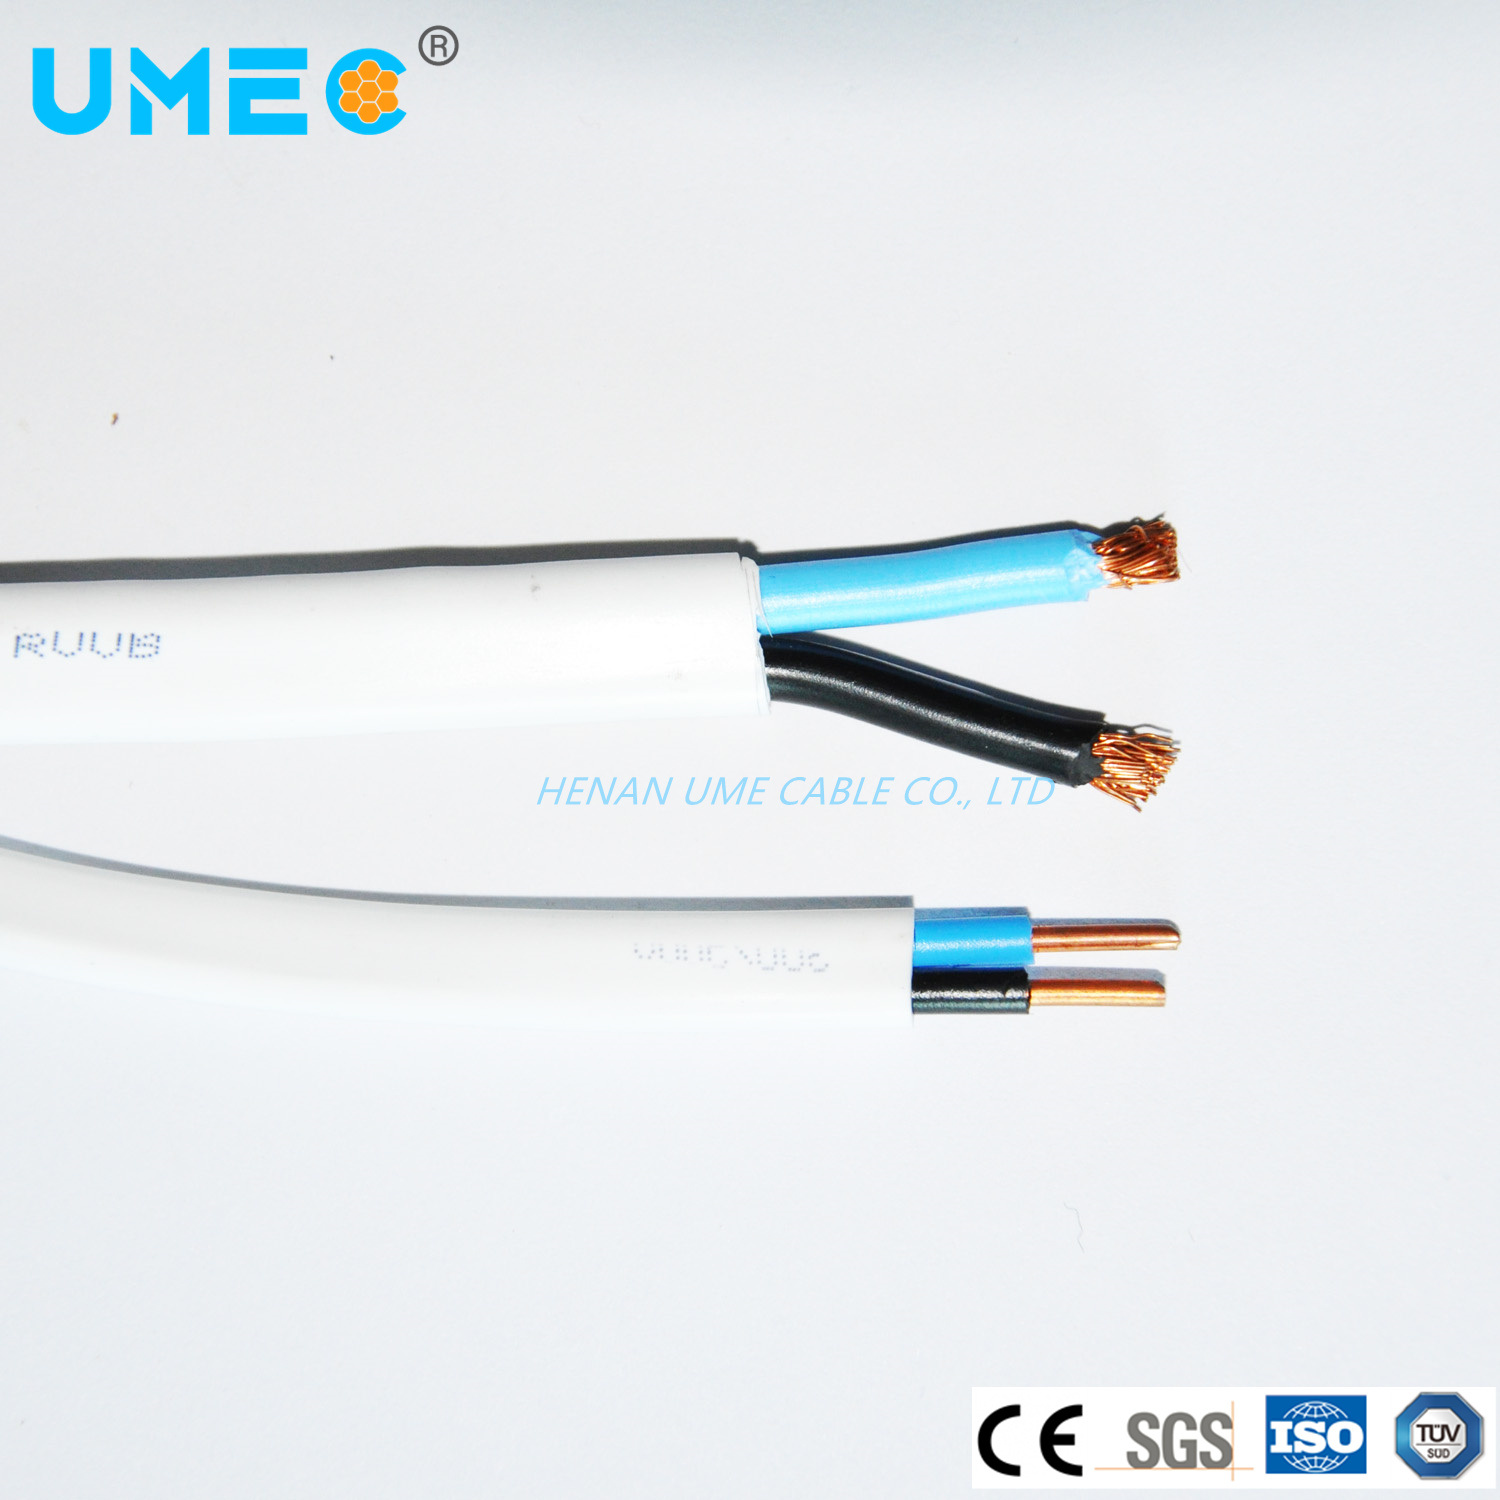 2022 Hot-Selling H03vvh2-F & H03VV-F Bare Stranded Flexible Copper Electric Wire and Cable